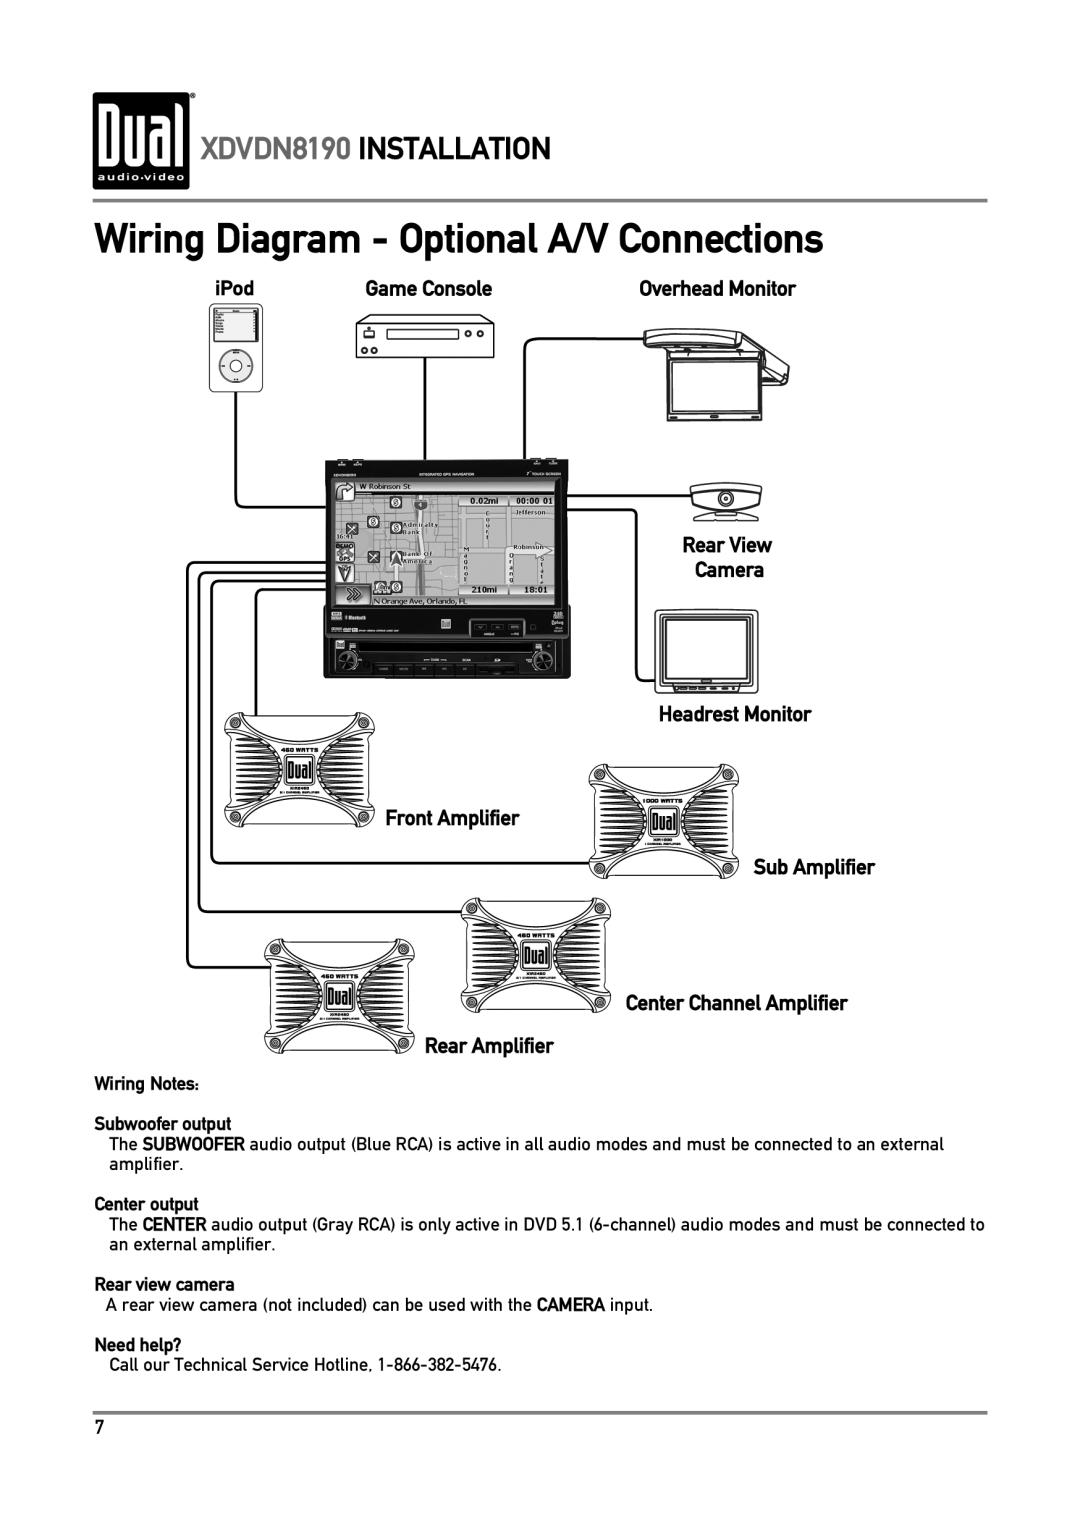 Dual Wiring Diagram - Optional A/V Connections, XDVDN8190 INSTALLATION, Wiring Notes Subwoofer output, Center output 